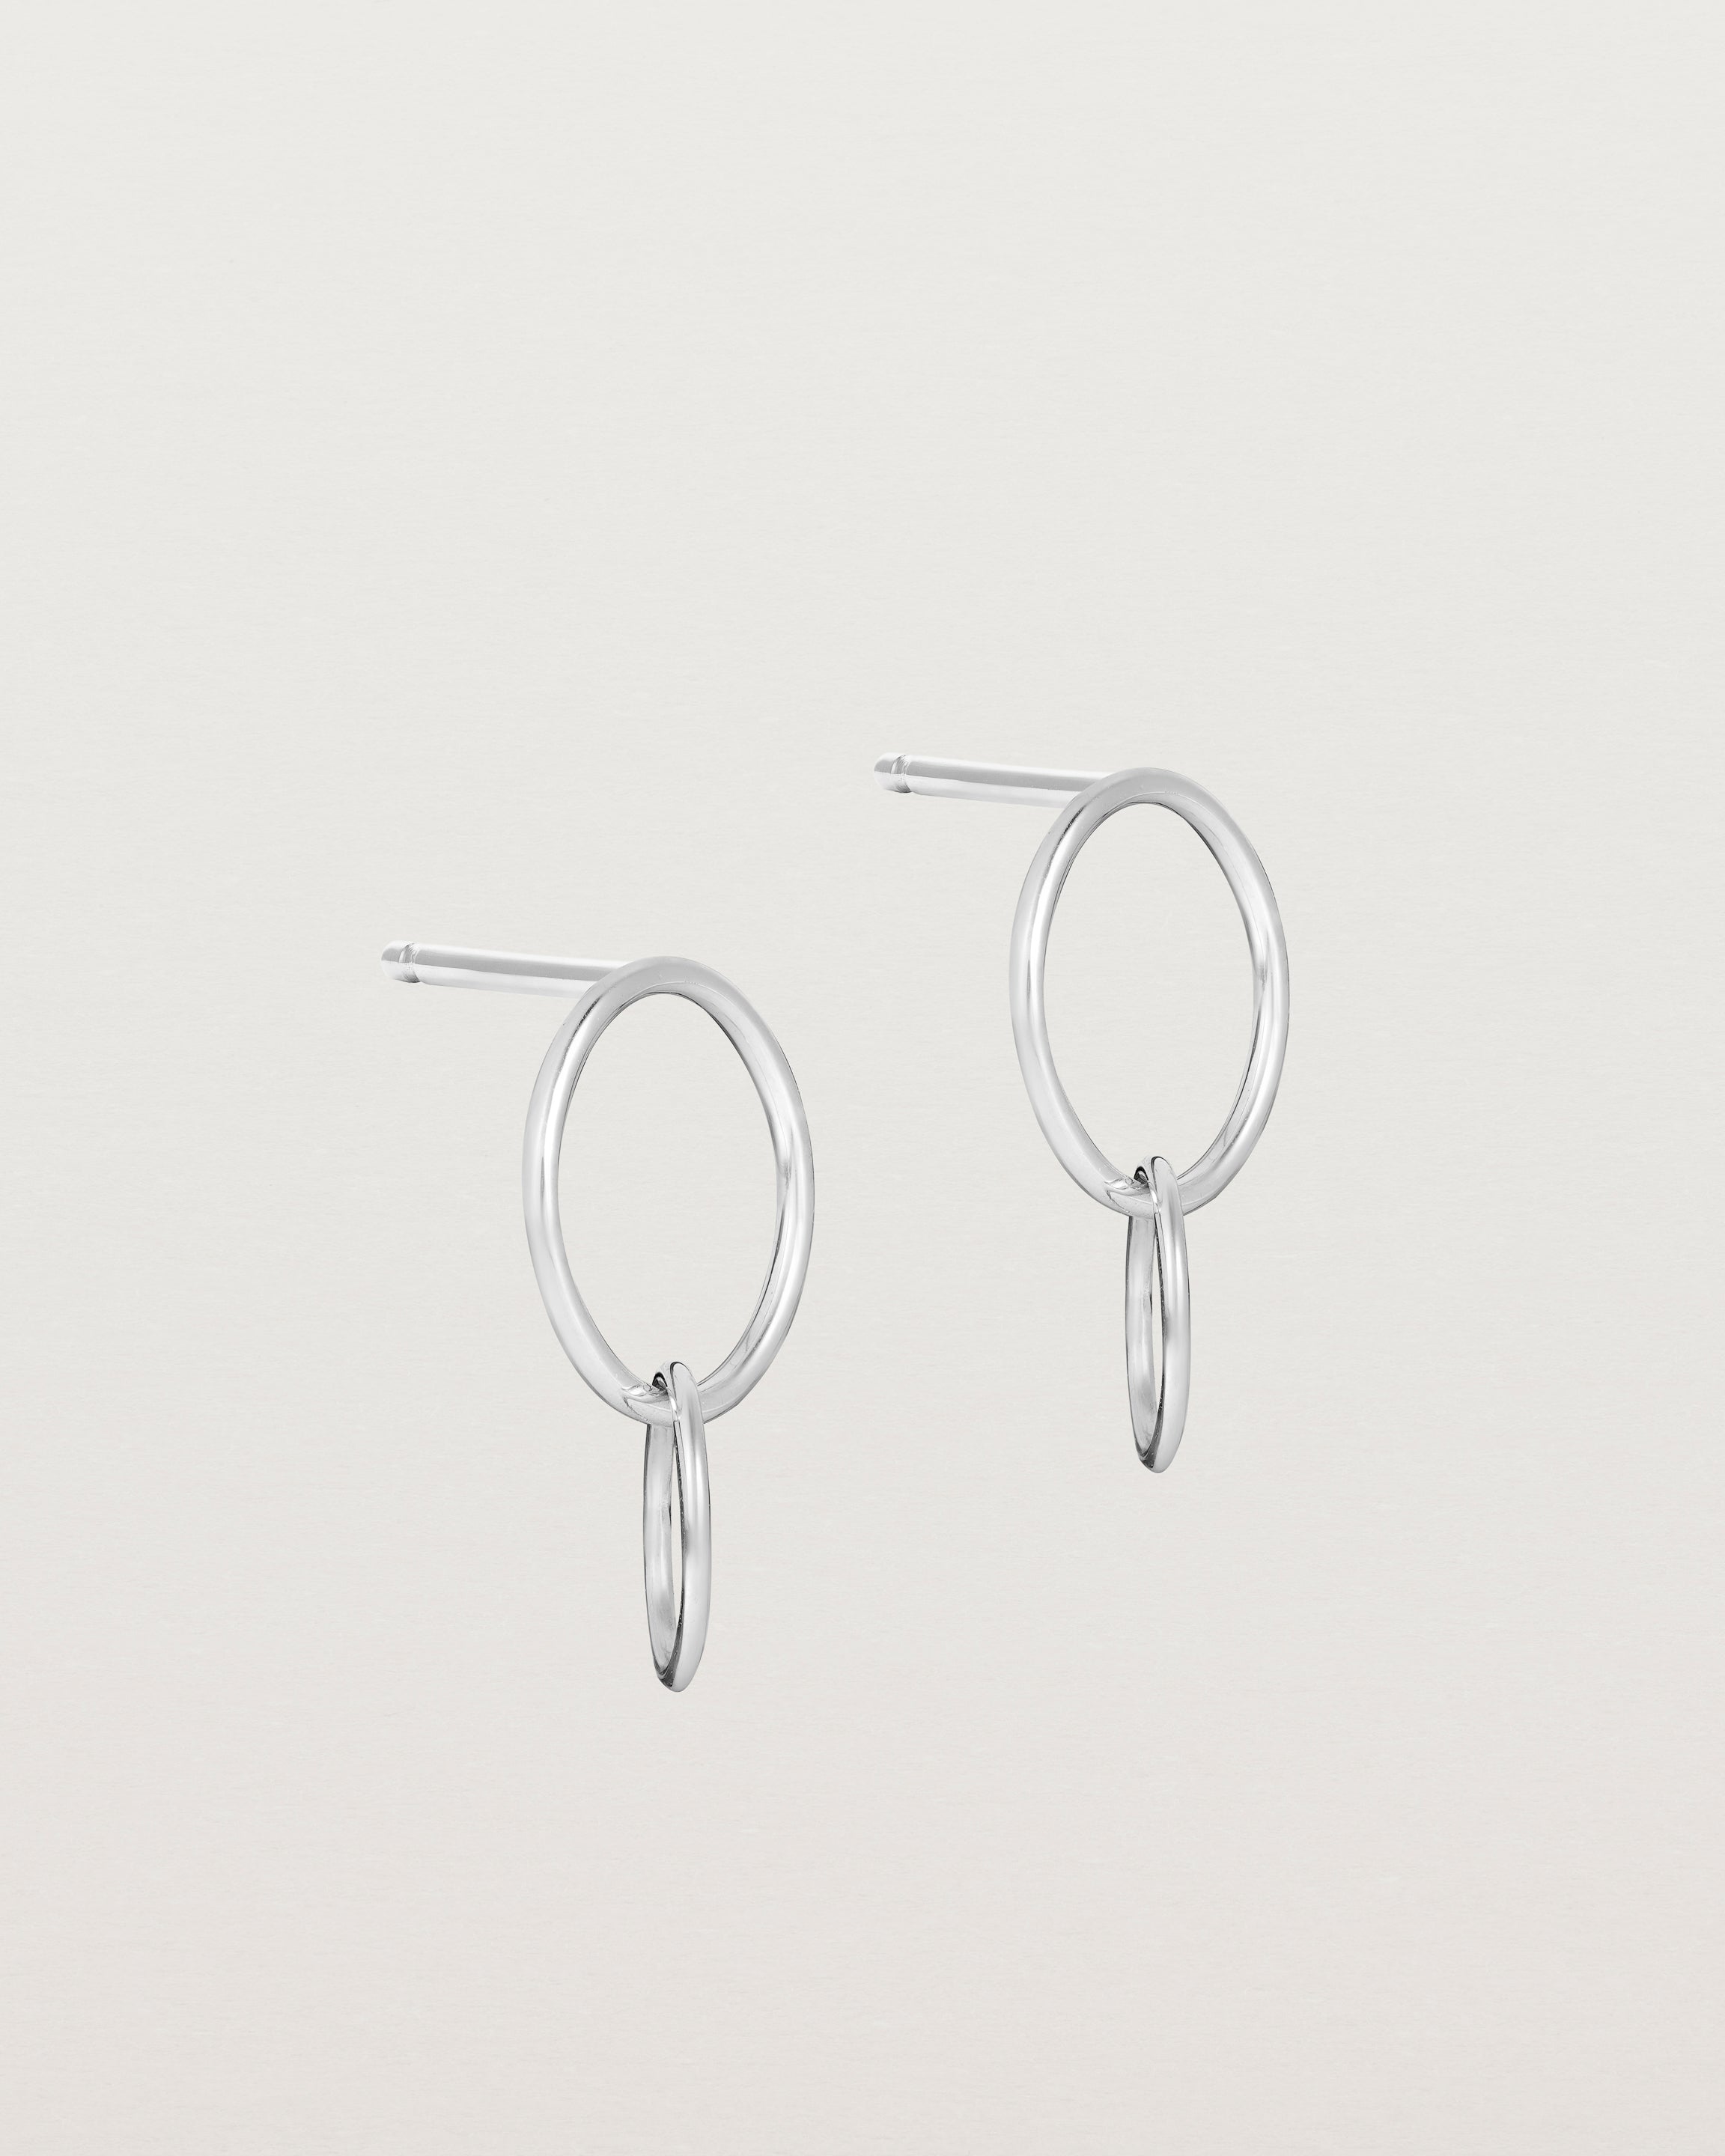 A pair of sterling silver studs featuring two intertwined hanging ovals